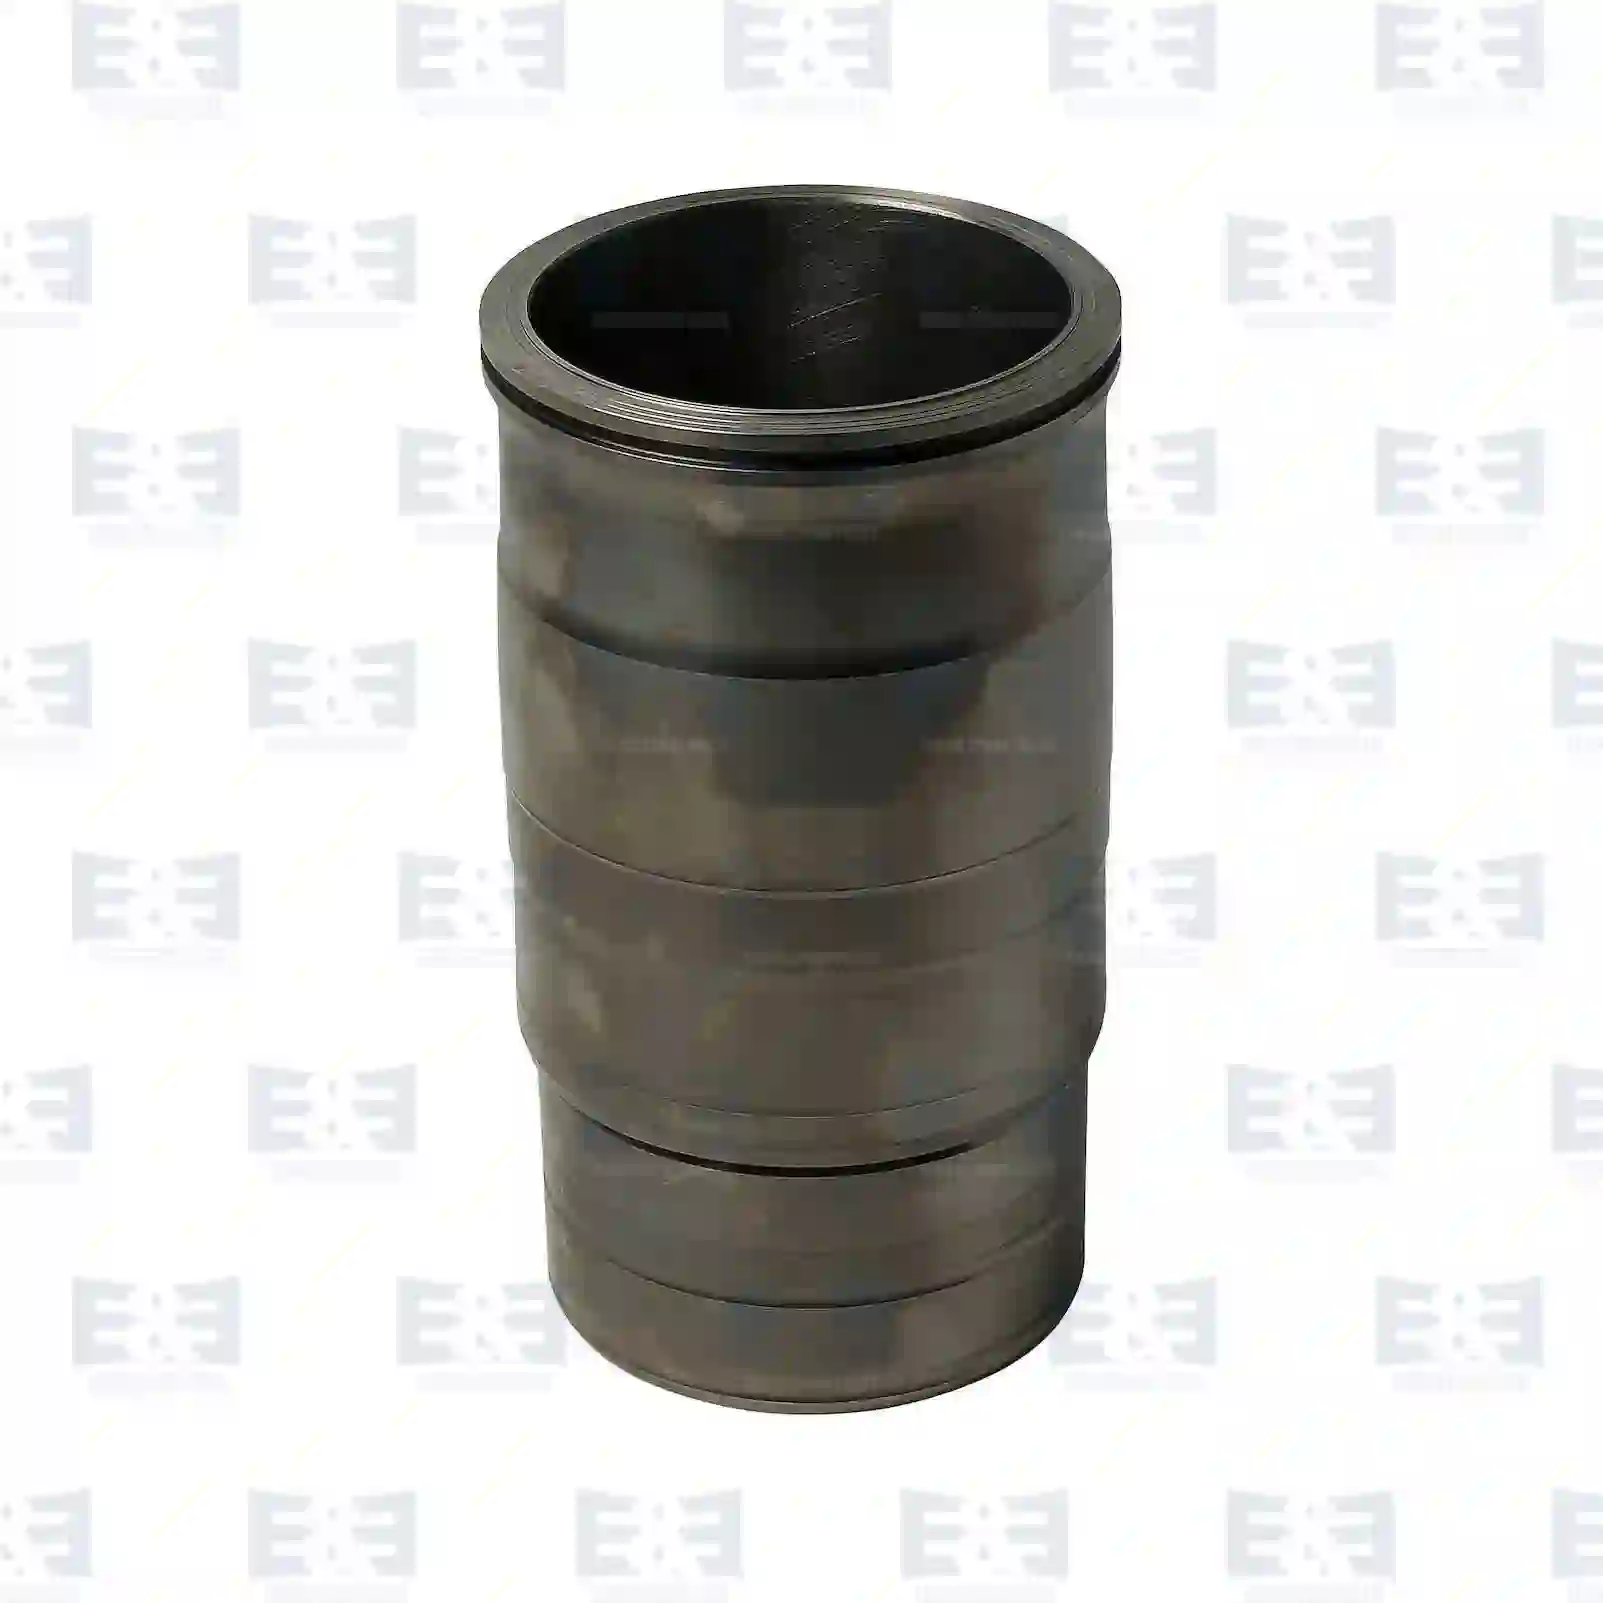 Cylinder liner, without seal rings, 2E2208370, 1777079, 1868160, 1917102, 1917107, ZG01077-0008 ||  2E2208370 E&E Truck Spare Parts | Truck Spare Parts, Auotomotive Spare Parts Cylinder liner, without seal rings, 2E2208370, 1777079, 1868160, 1917102, 1917107, ZG01077-0008 ||  2E2208370 E&E Truck Spare Parts | Truck Spare Parts, Auotomotive Spare Parts